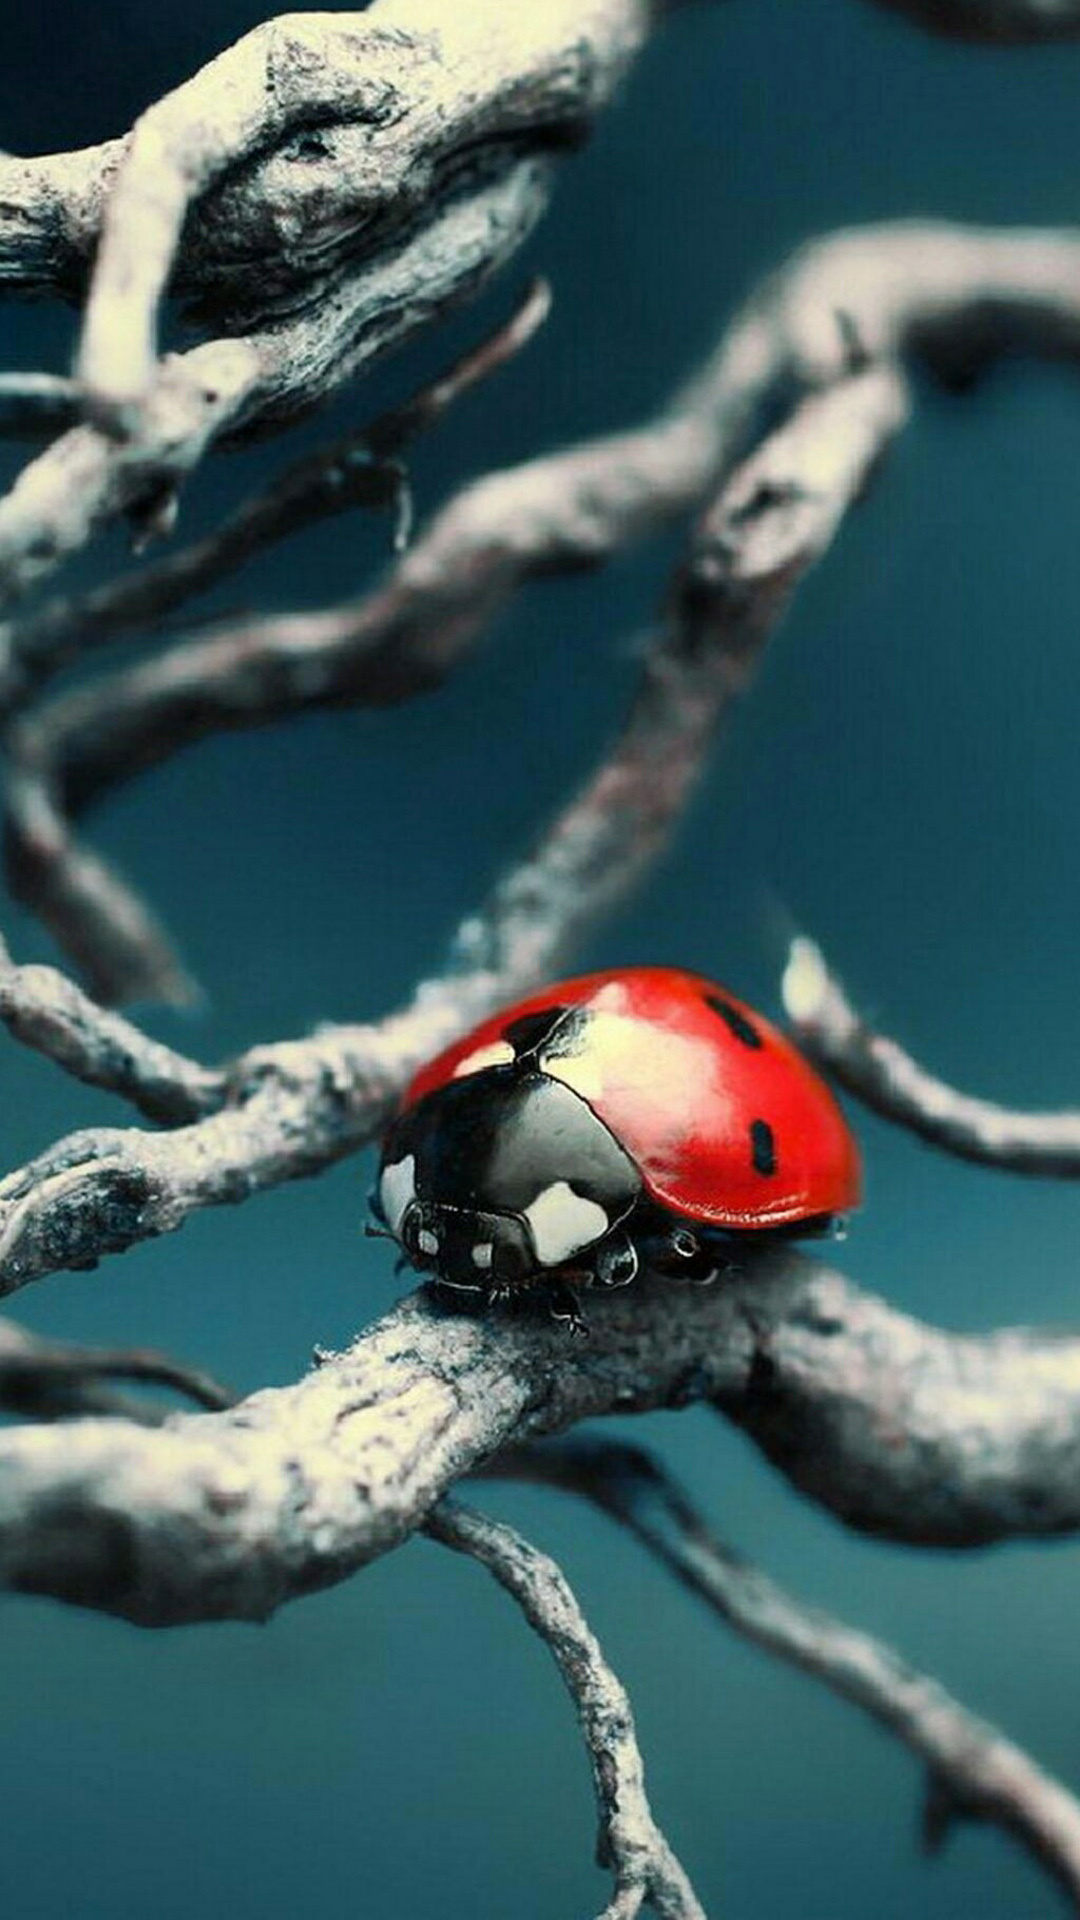 Beetle insect wallpaper, Mobile backgrounds, Insect's armor, Exquisite details, 1080x1920 Full HD Phone